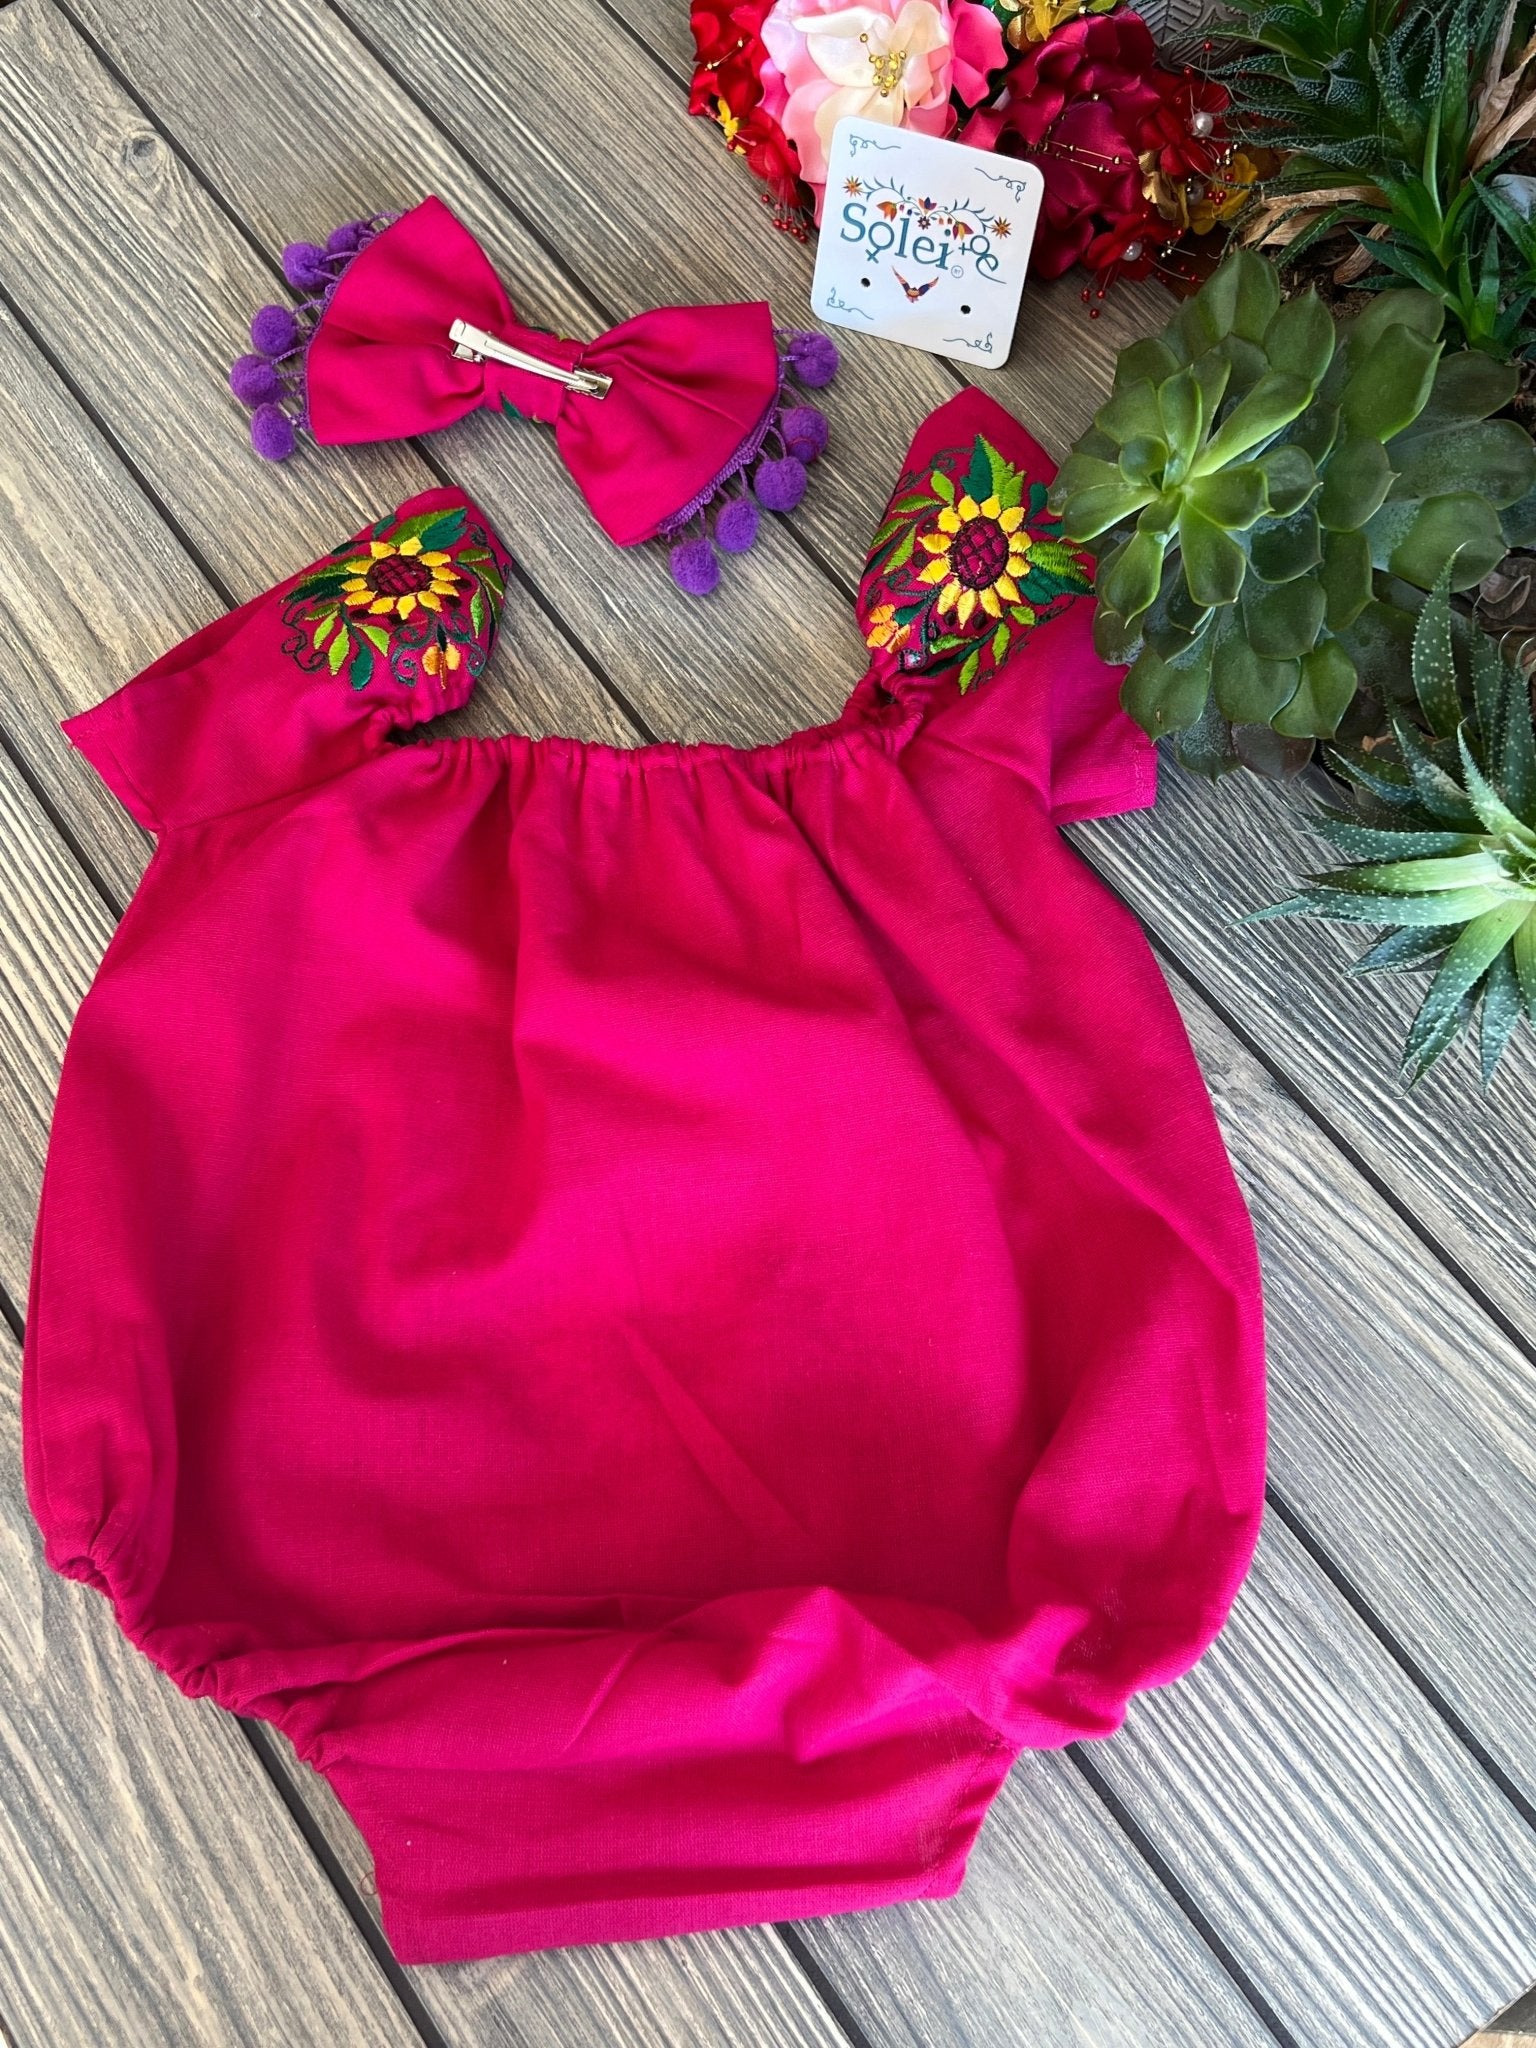 Mexican Baby Floral Embroidered Bodysuit. Pañalero Girasol - Solei Store